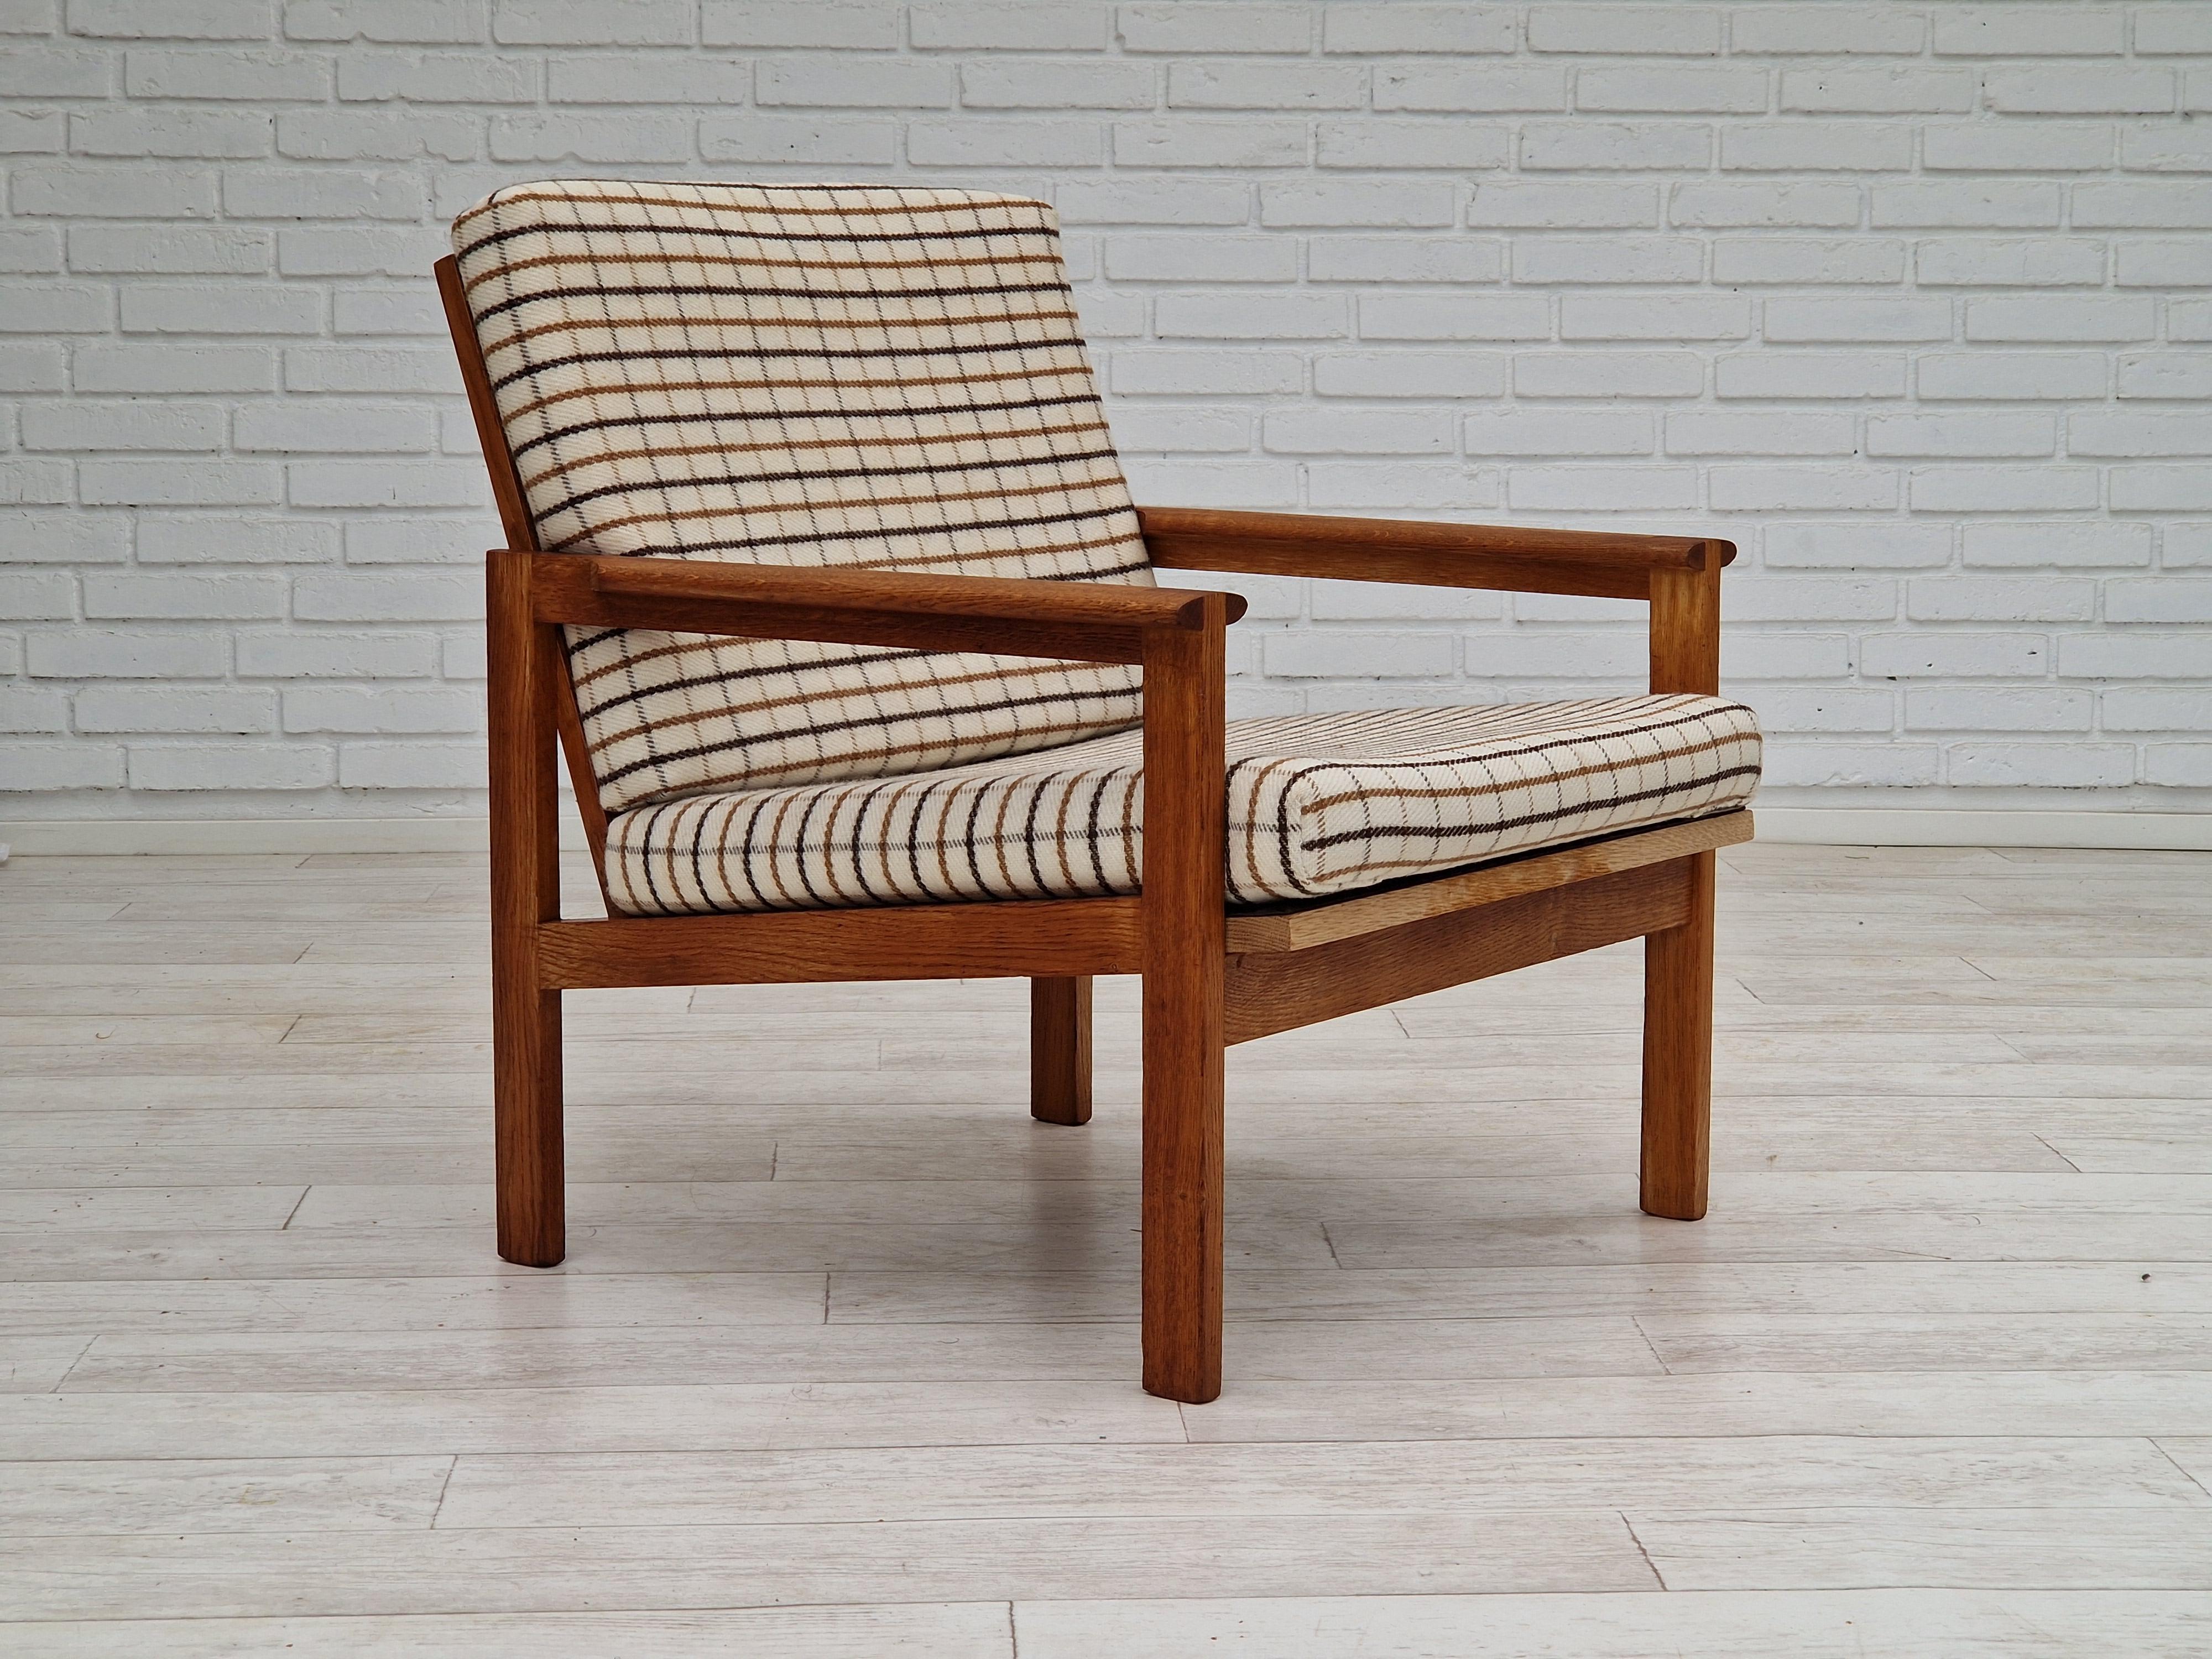 1970s, Danish design by Illum Wikkelsø, model Capella for Eliersen Møbler. Oak wood. Very good condition: no smells and no stains. New reupholstered in a few years ago.